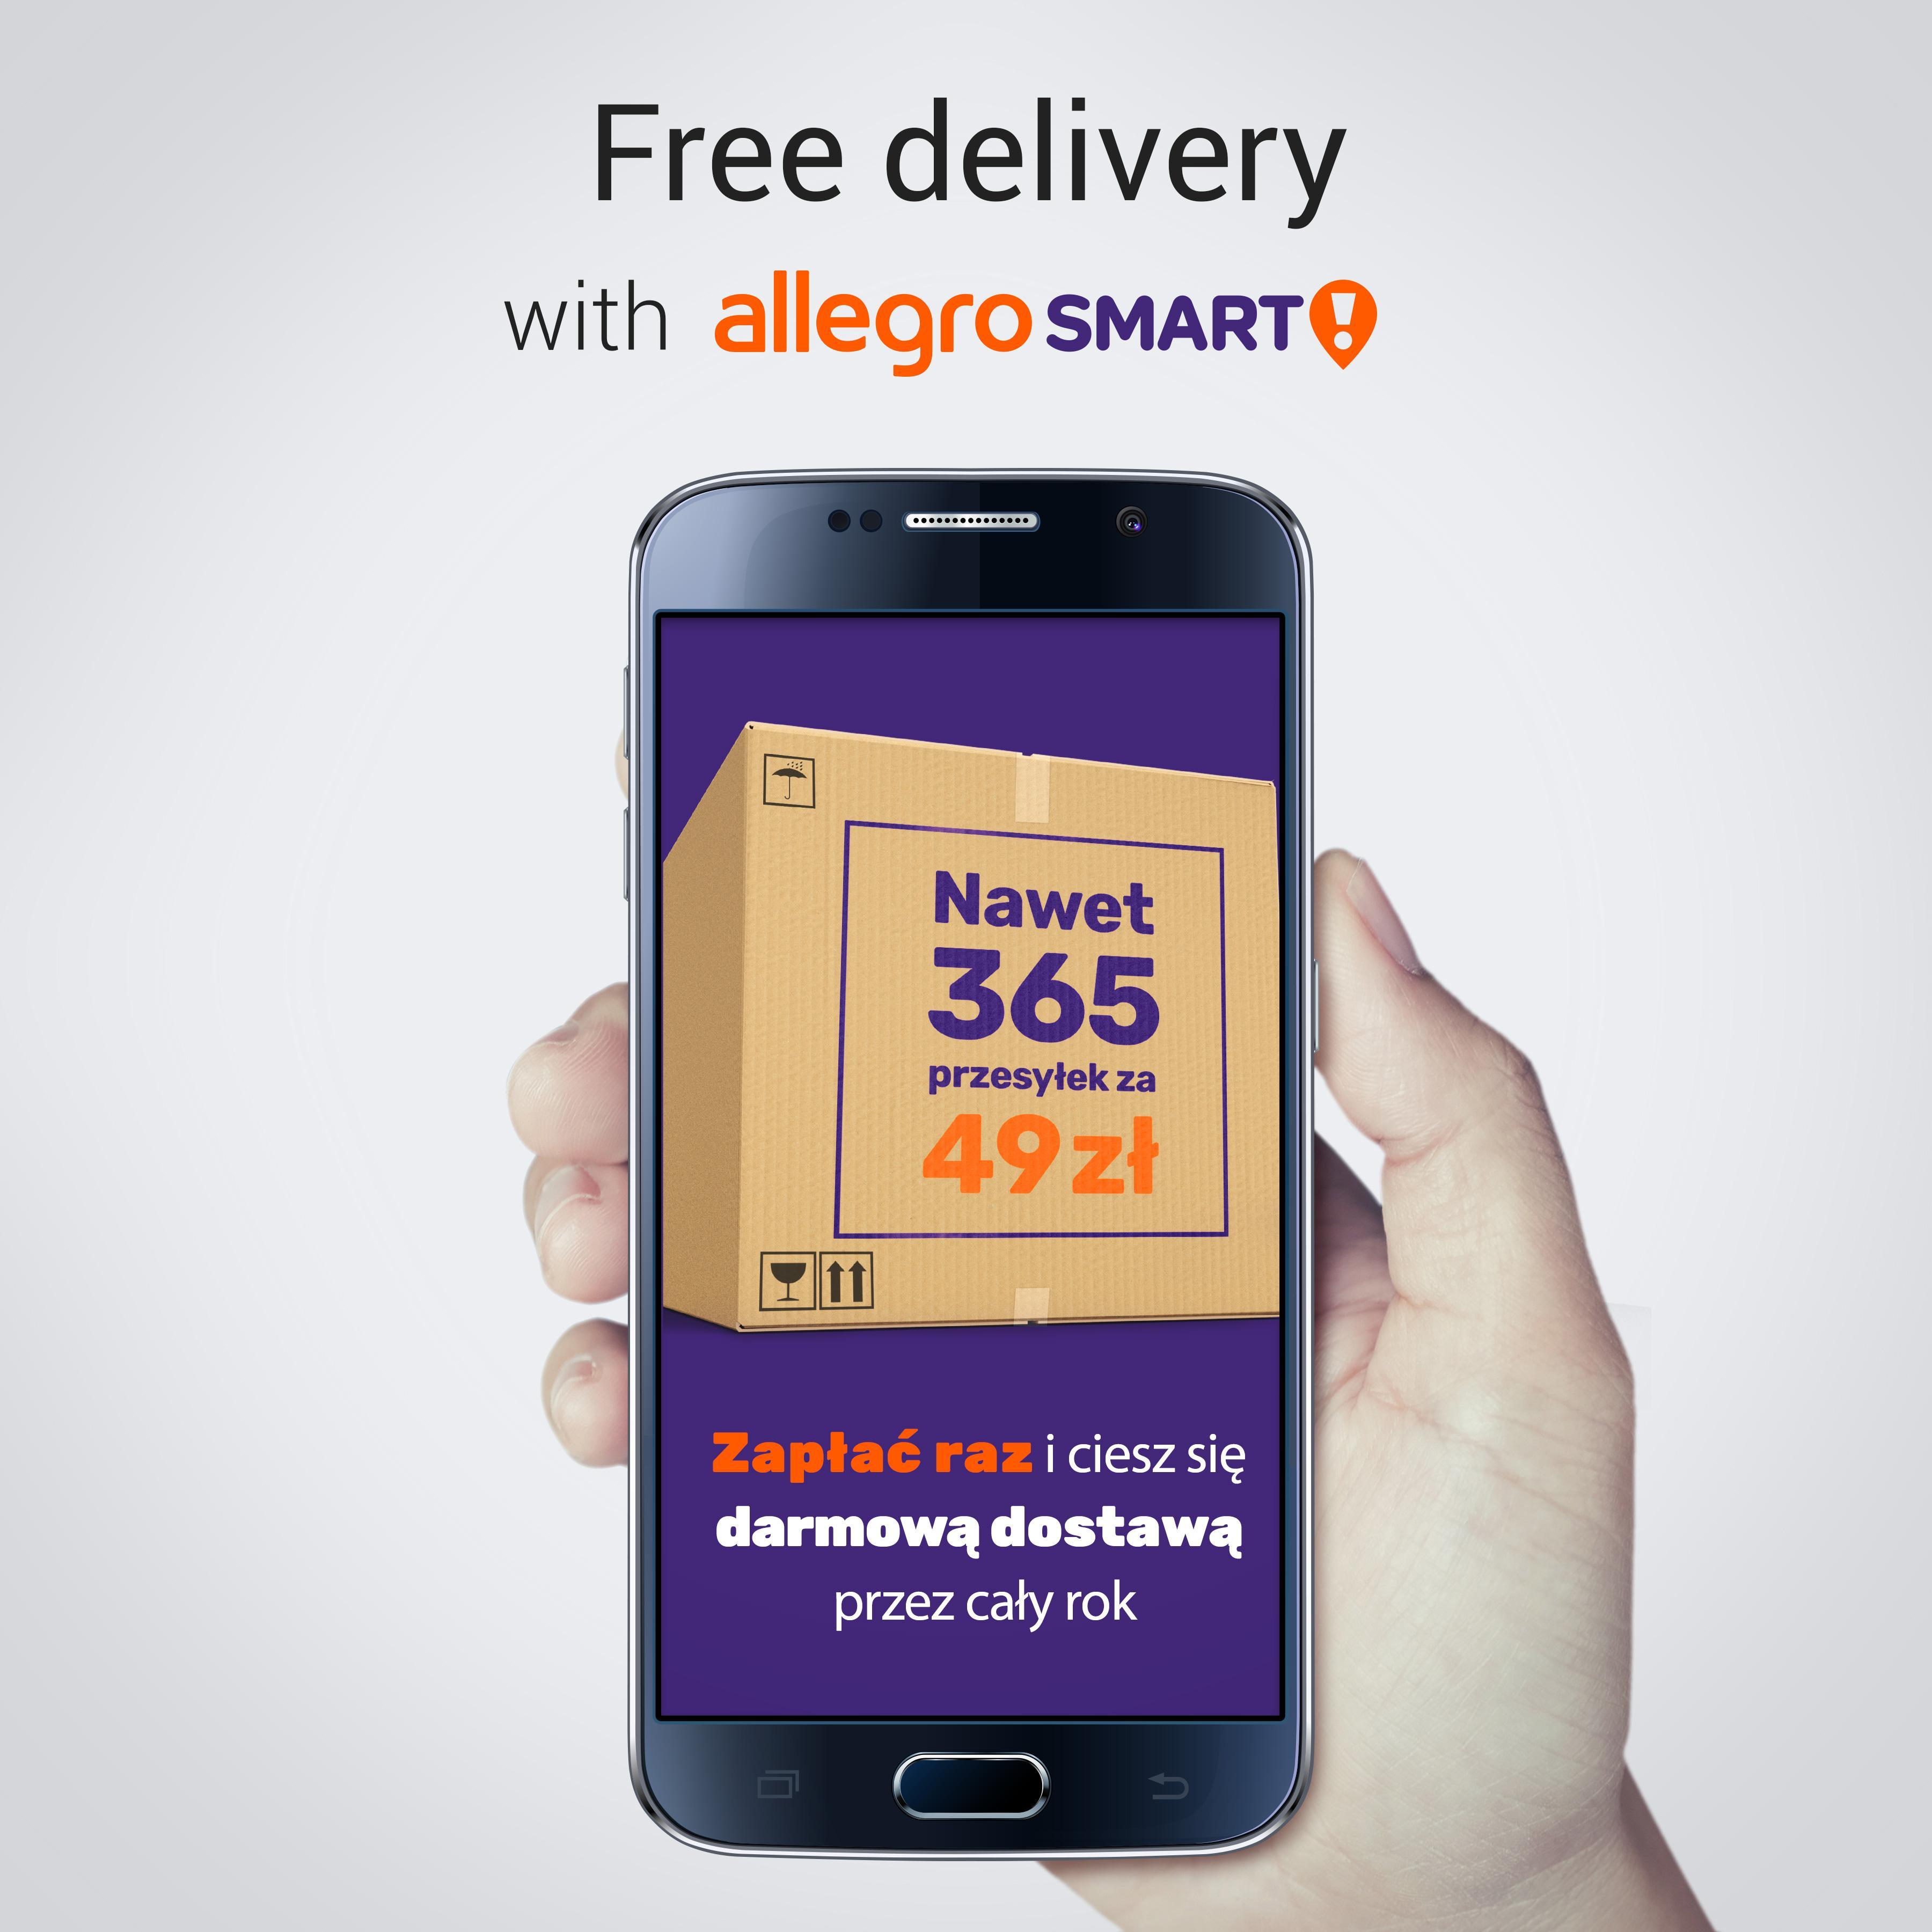 Allegro convenient and secure online shopping 6.56.0 Screenshot 1